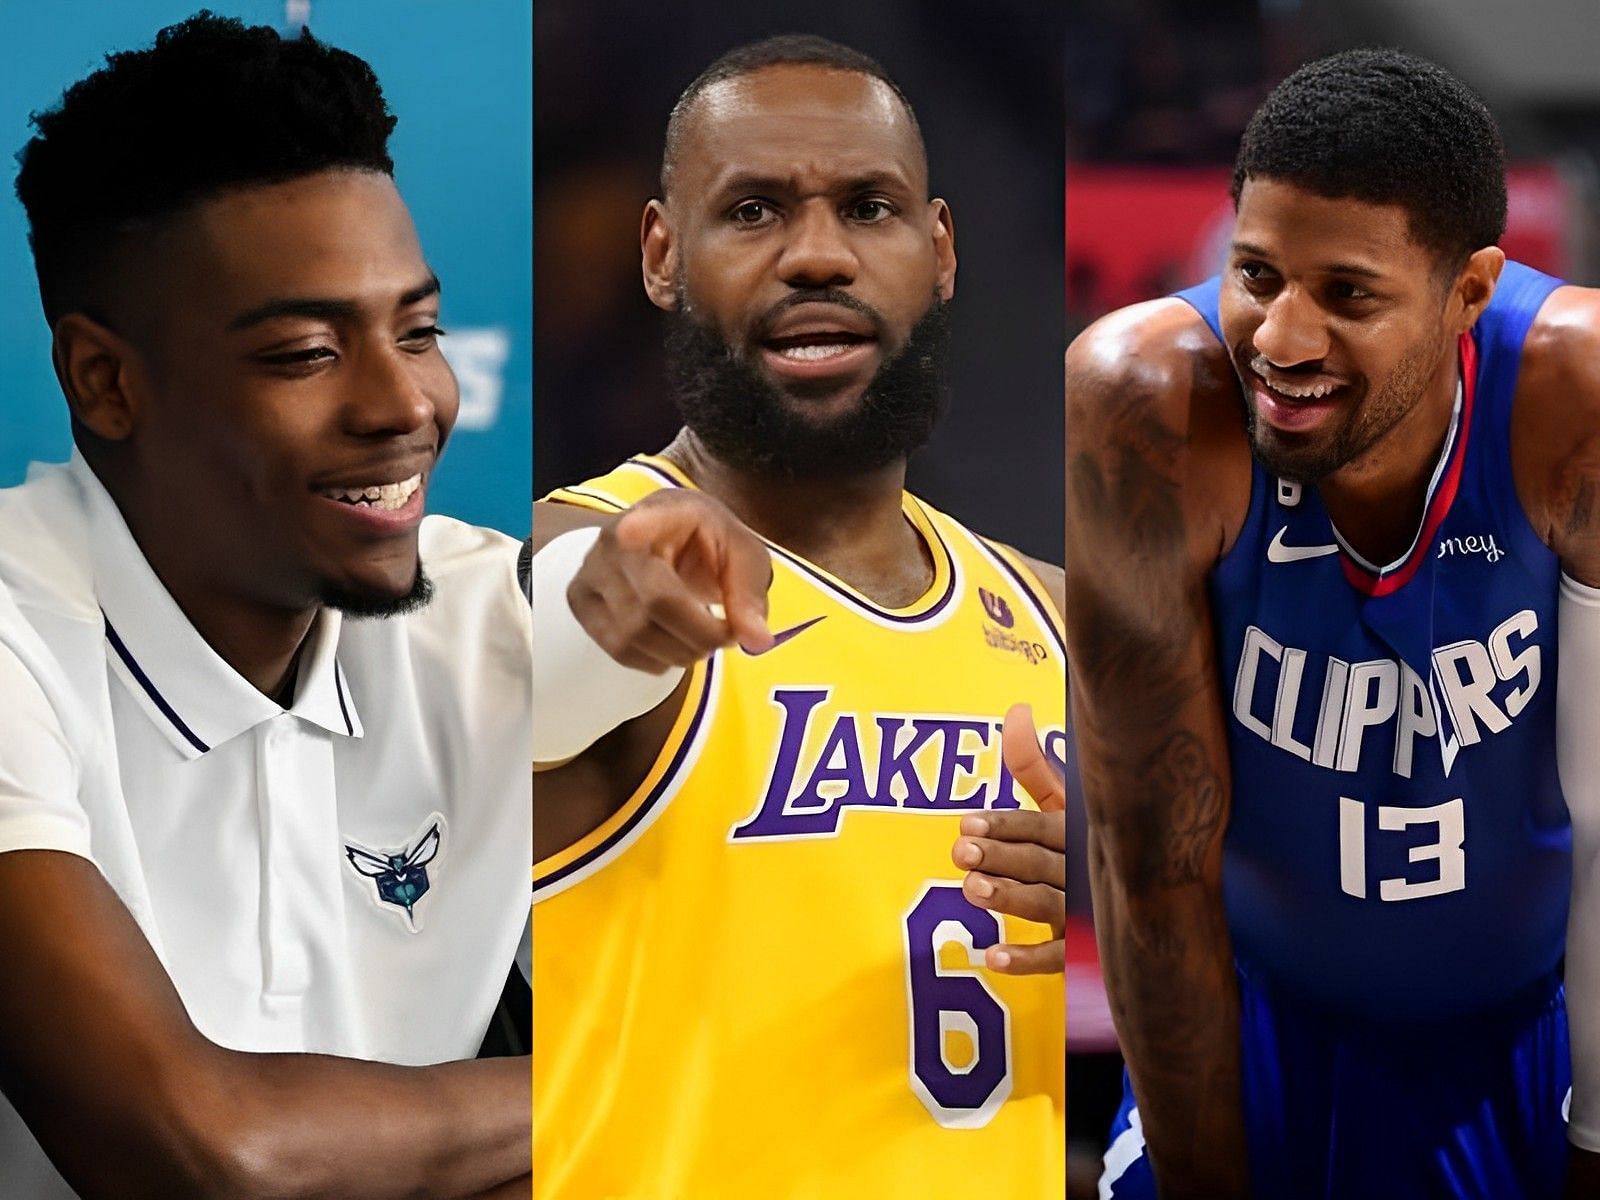 Charlotte Hornets forward Brandon Miller, LA Lakers star forward LeBron James and LA Clippers star wing Paul George